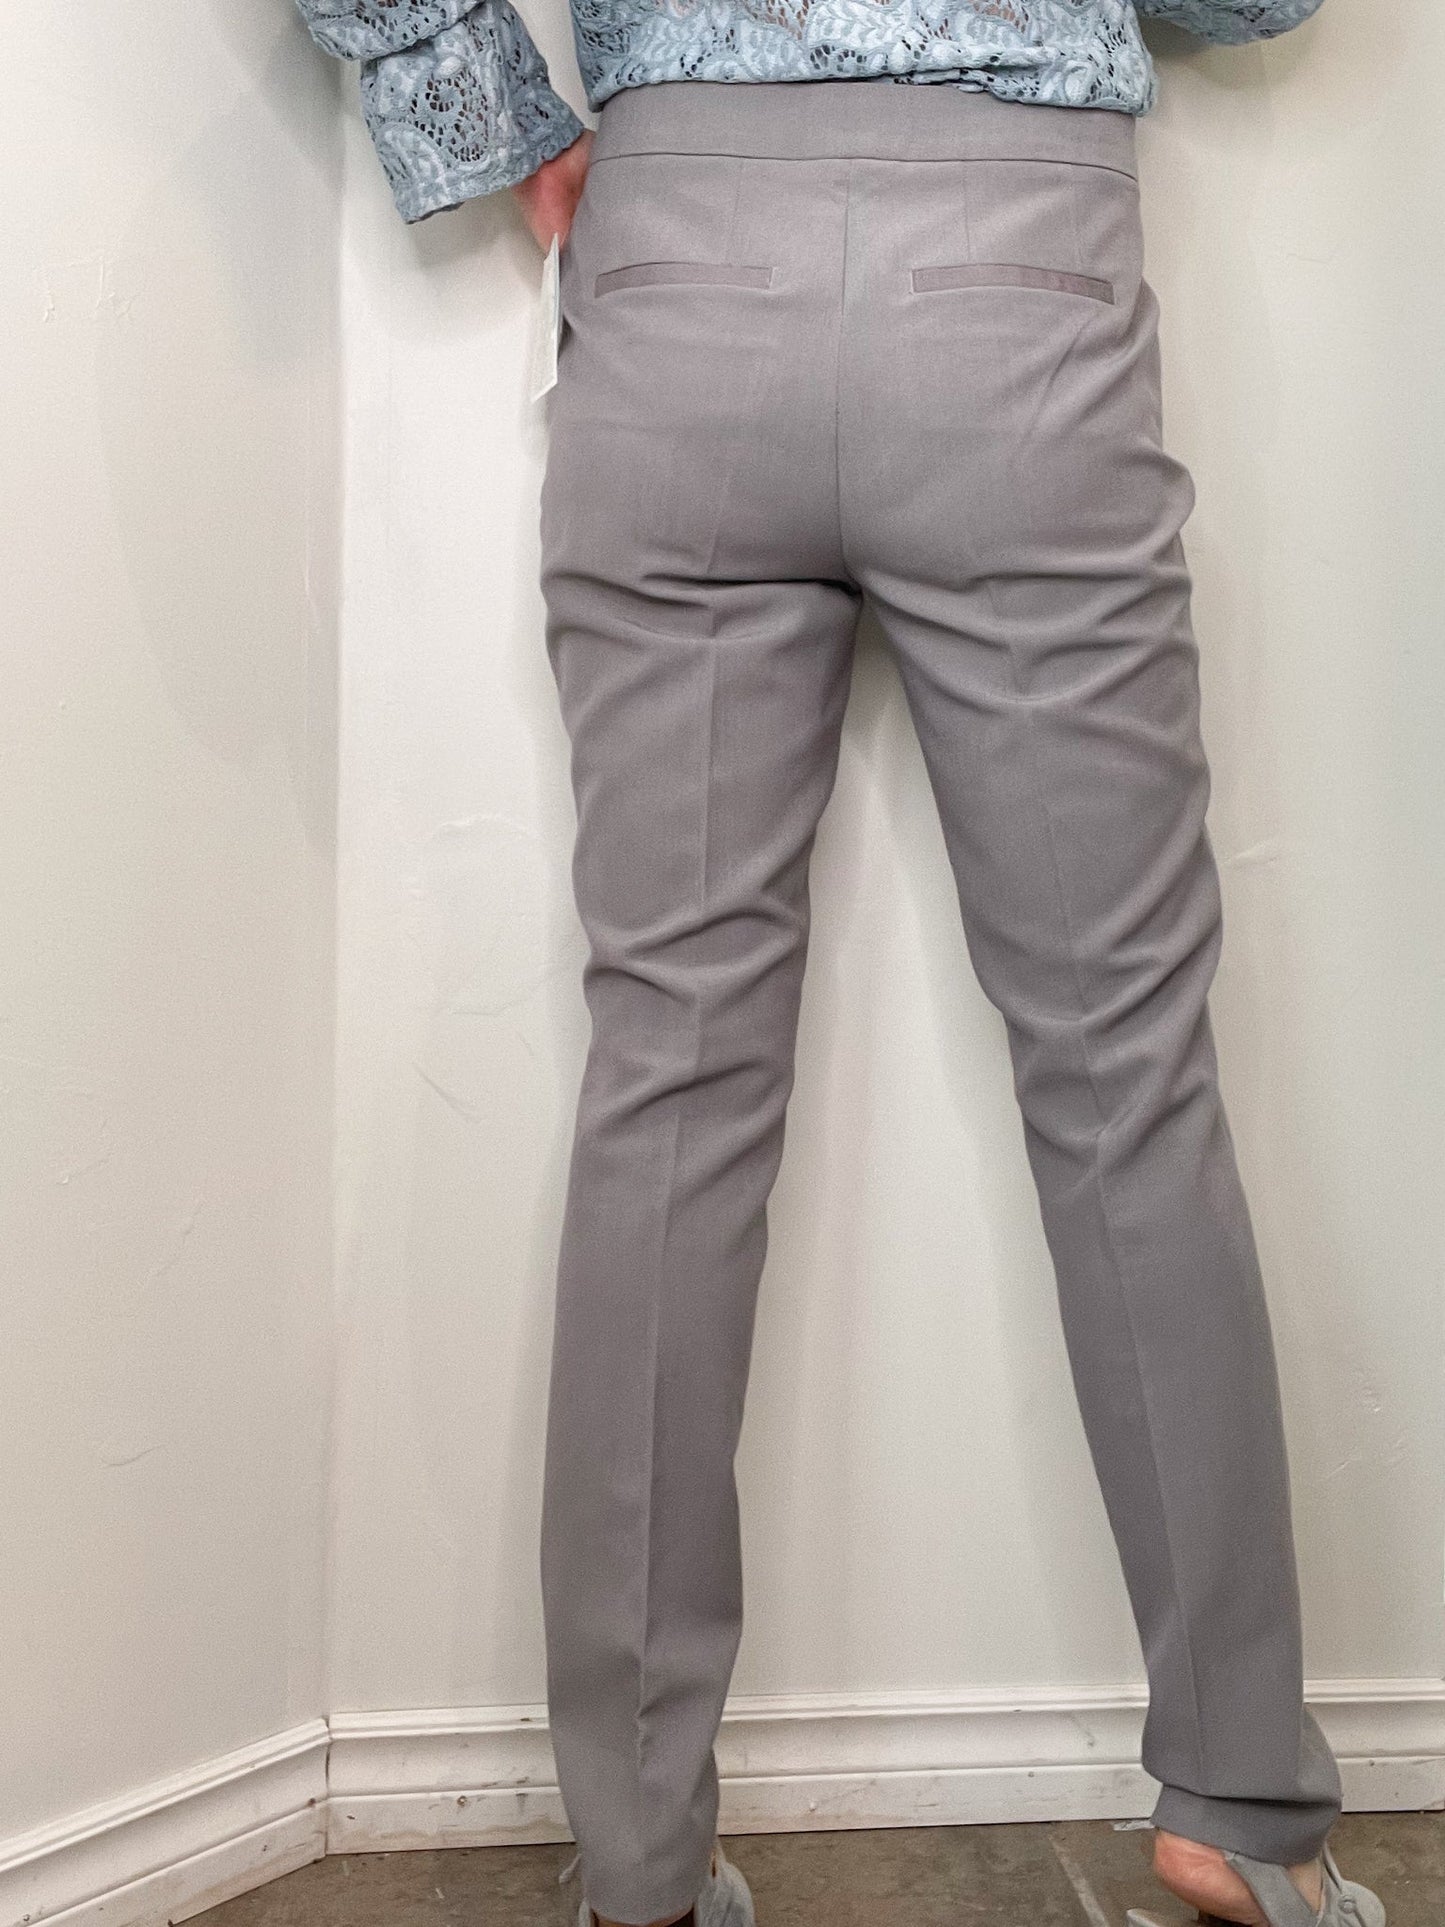 Kenneth Cole Reaction Grey Slim Straight High Rise Trouser Pants - Size 8